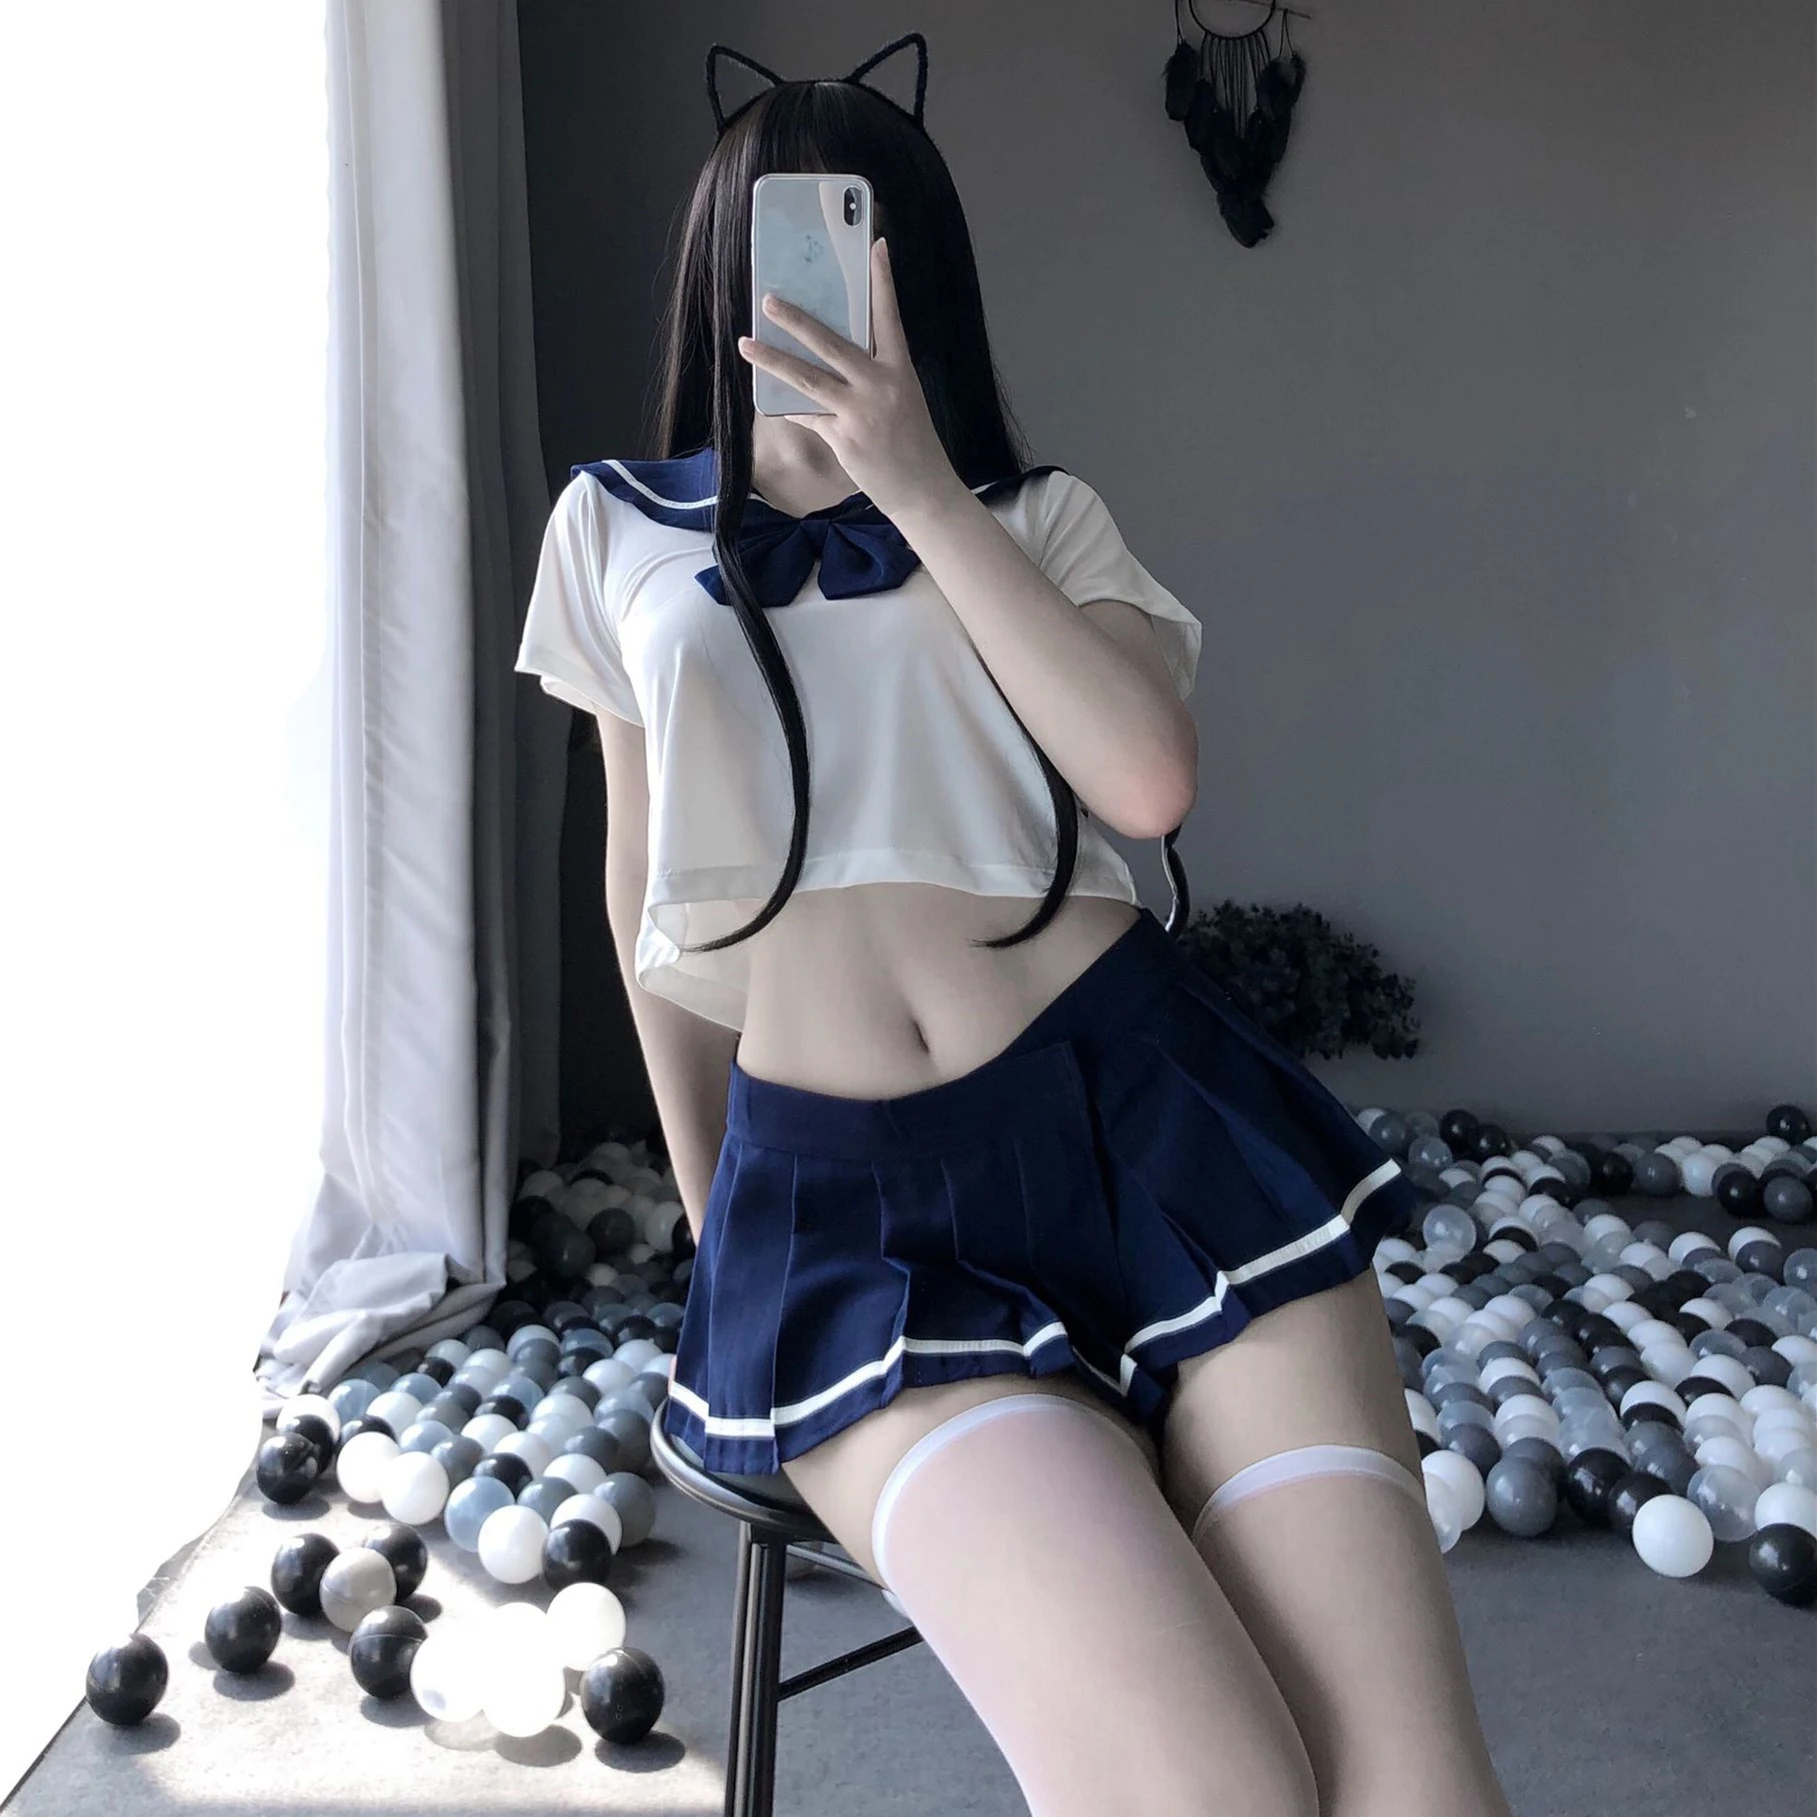 

Sexy Lingerie Cosplay Costume Jk Uniform Kwaii Lolita Underwear Mini Top Skirt Erotic Roleplay Set Student Sailor Maids Outfit